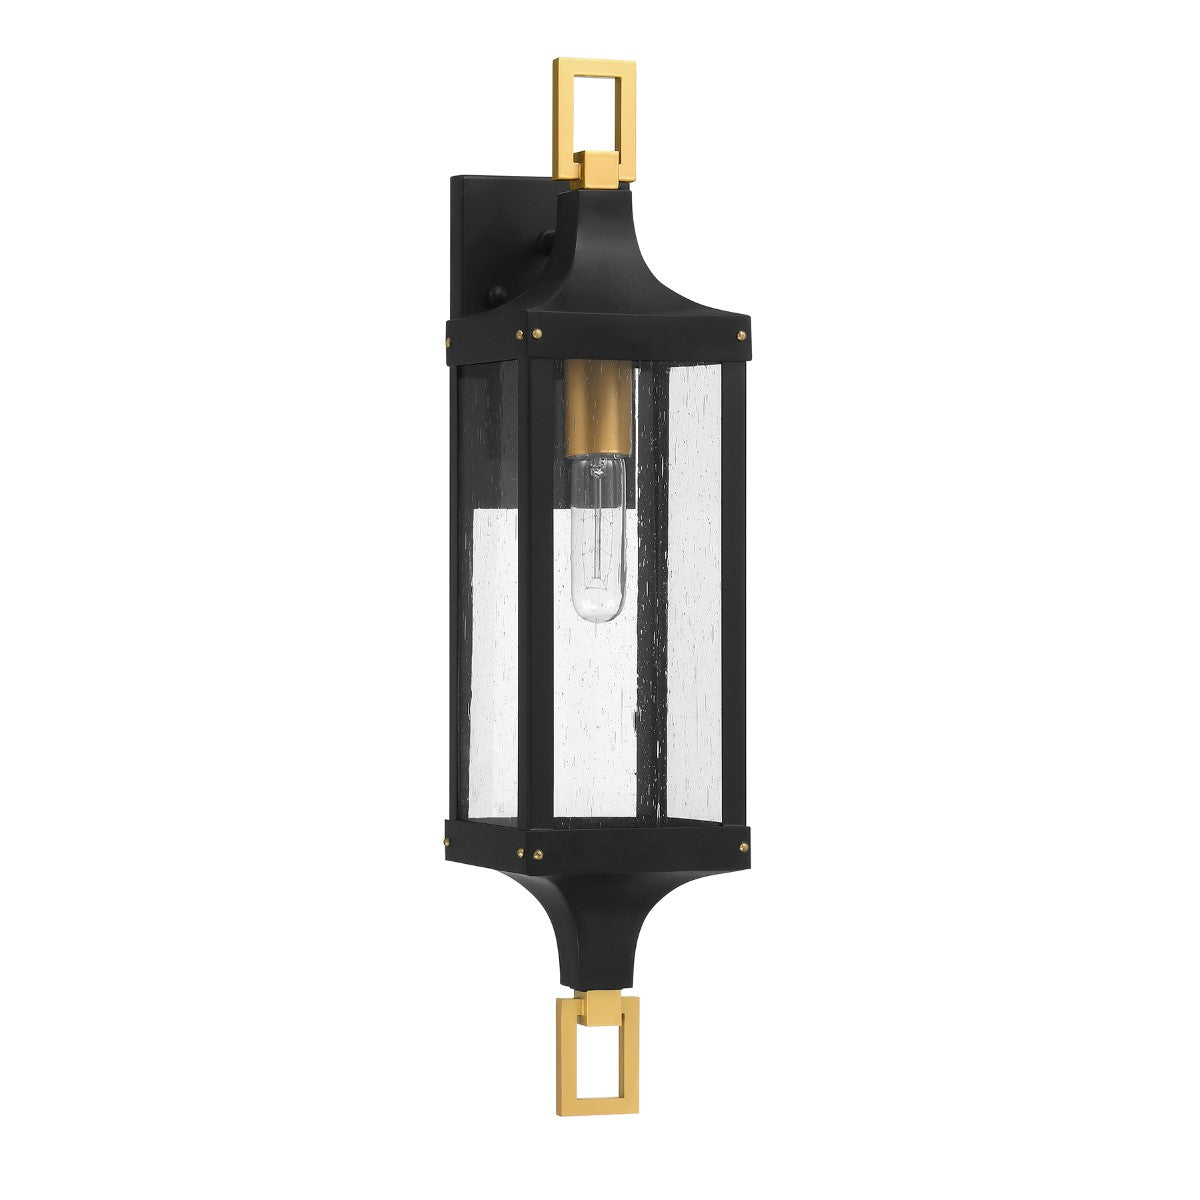 Glendale 25 in. Outdoor Wall Lantern Matte Black and Weathered Brushed Brass Finish - Bees Lighting